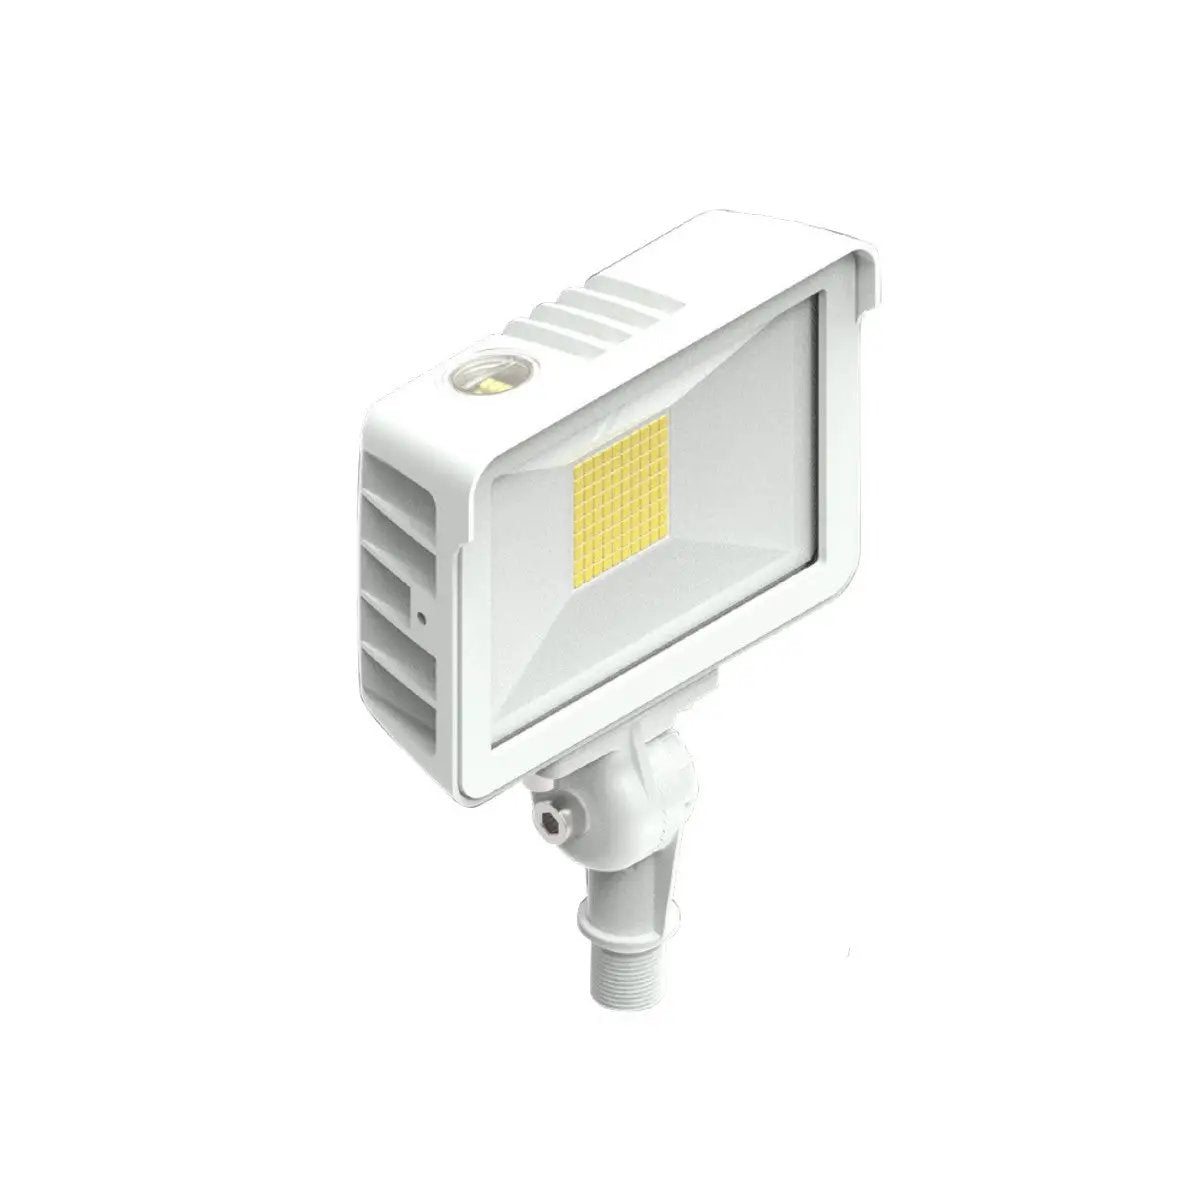 Waterproof Outdoor Flood Light with adjustable white light and universal mounting. Color selectable, energy-saving LED with dusk-to-dawn photocell. 35W, 5075 lumens, 3000K-5000K, UL Listed, IP65 Rated, DLC Premium Listed.